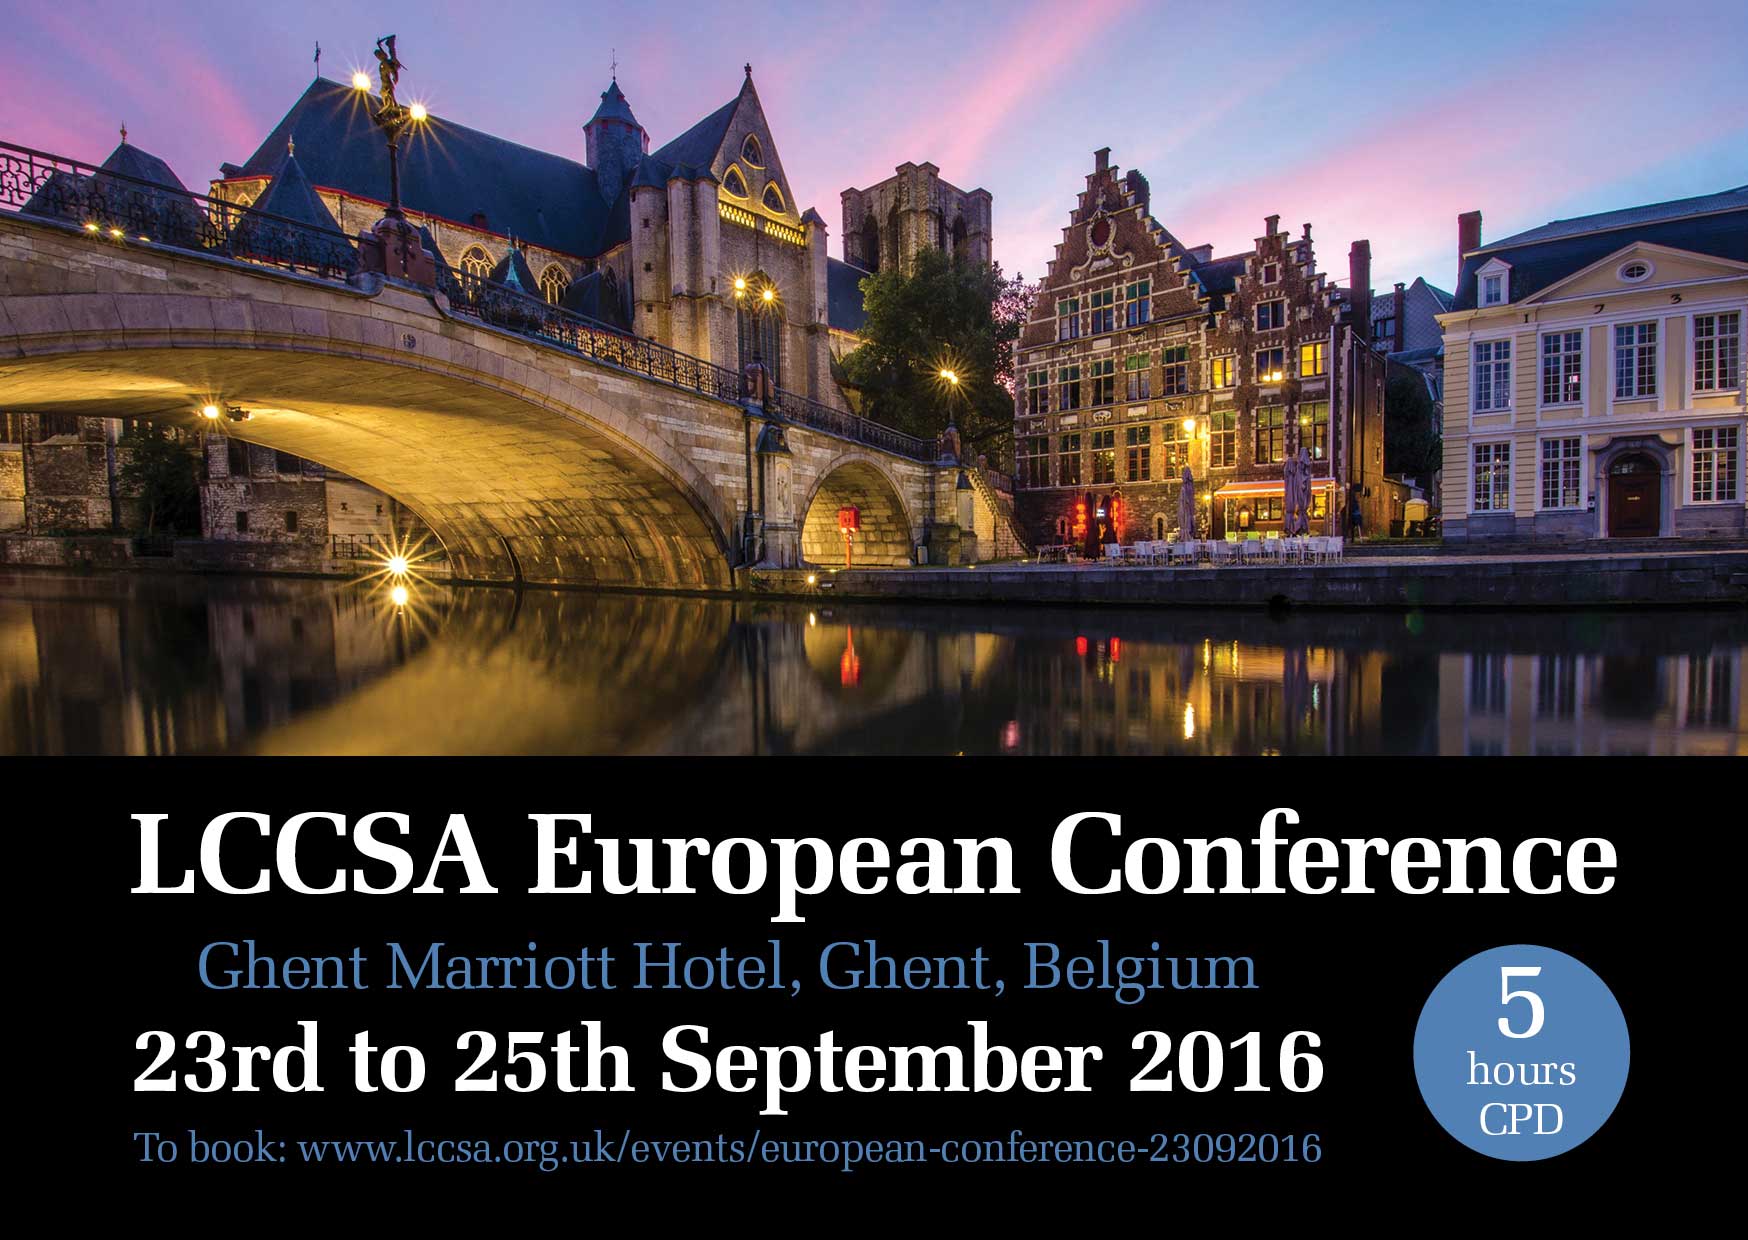 Advert for LCCSA European Conference (2016)